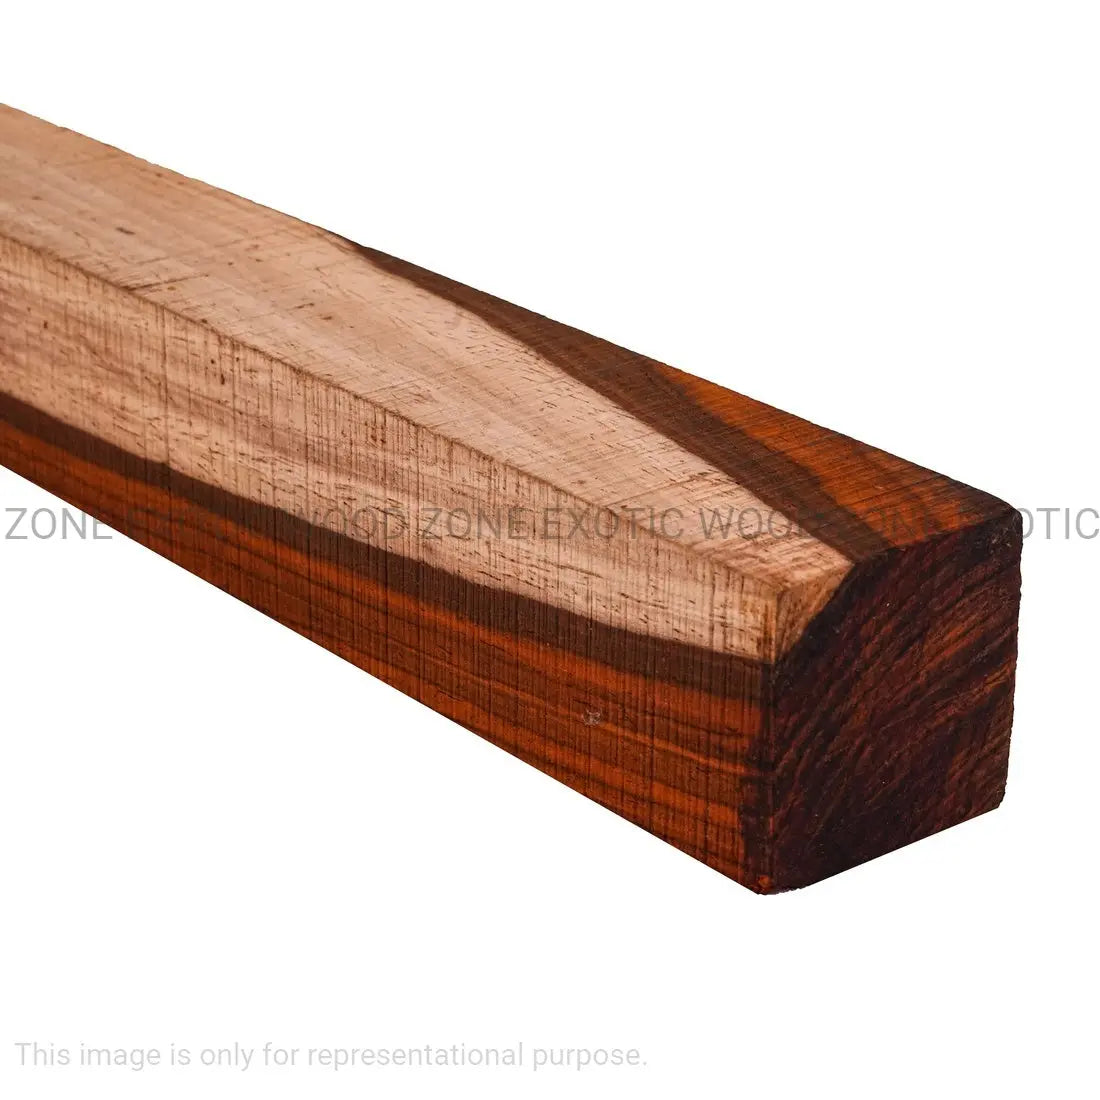 Cocobolo Turning Blanks - Exotic Wood Zone - Buy online Across USA 